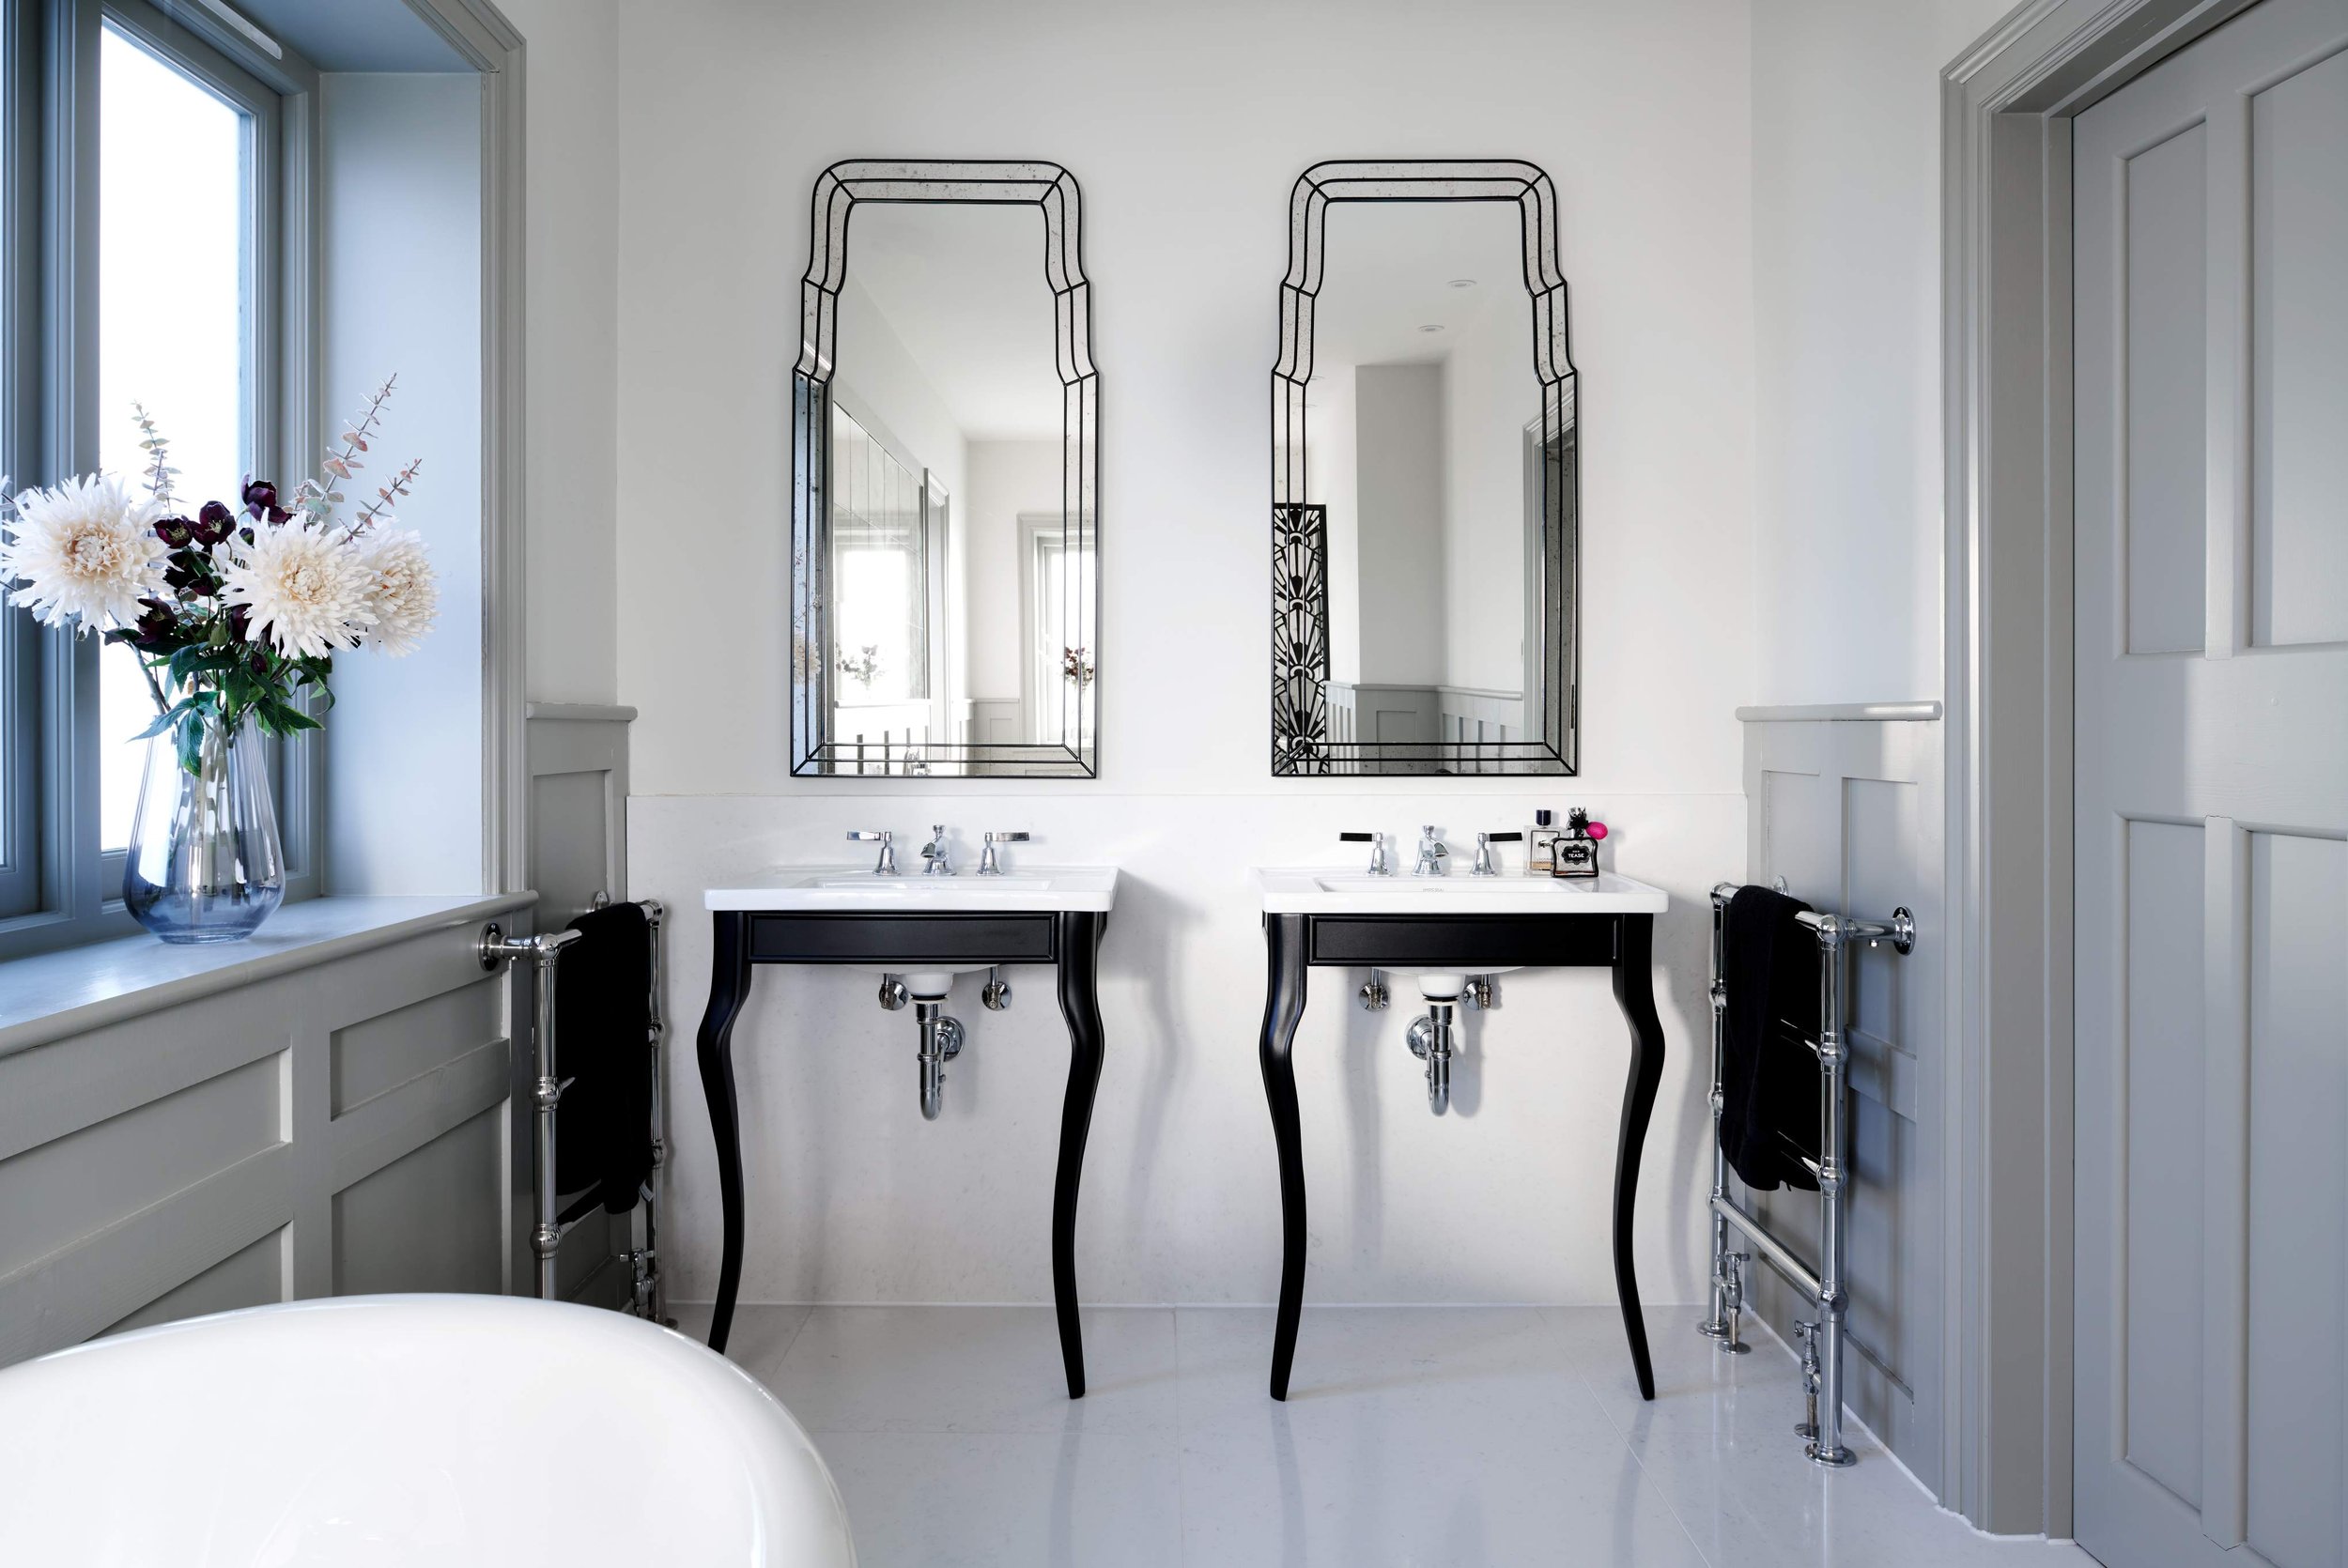 vintage-style-twin-basins-with-art-deco-mirrors.jpg